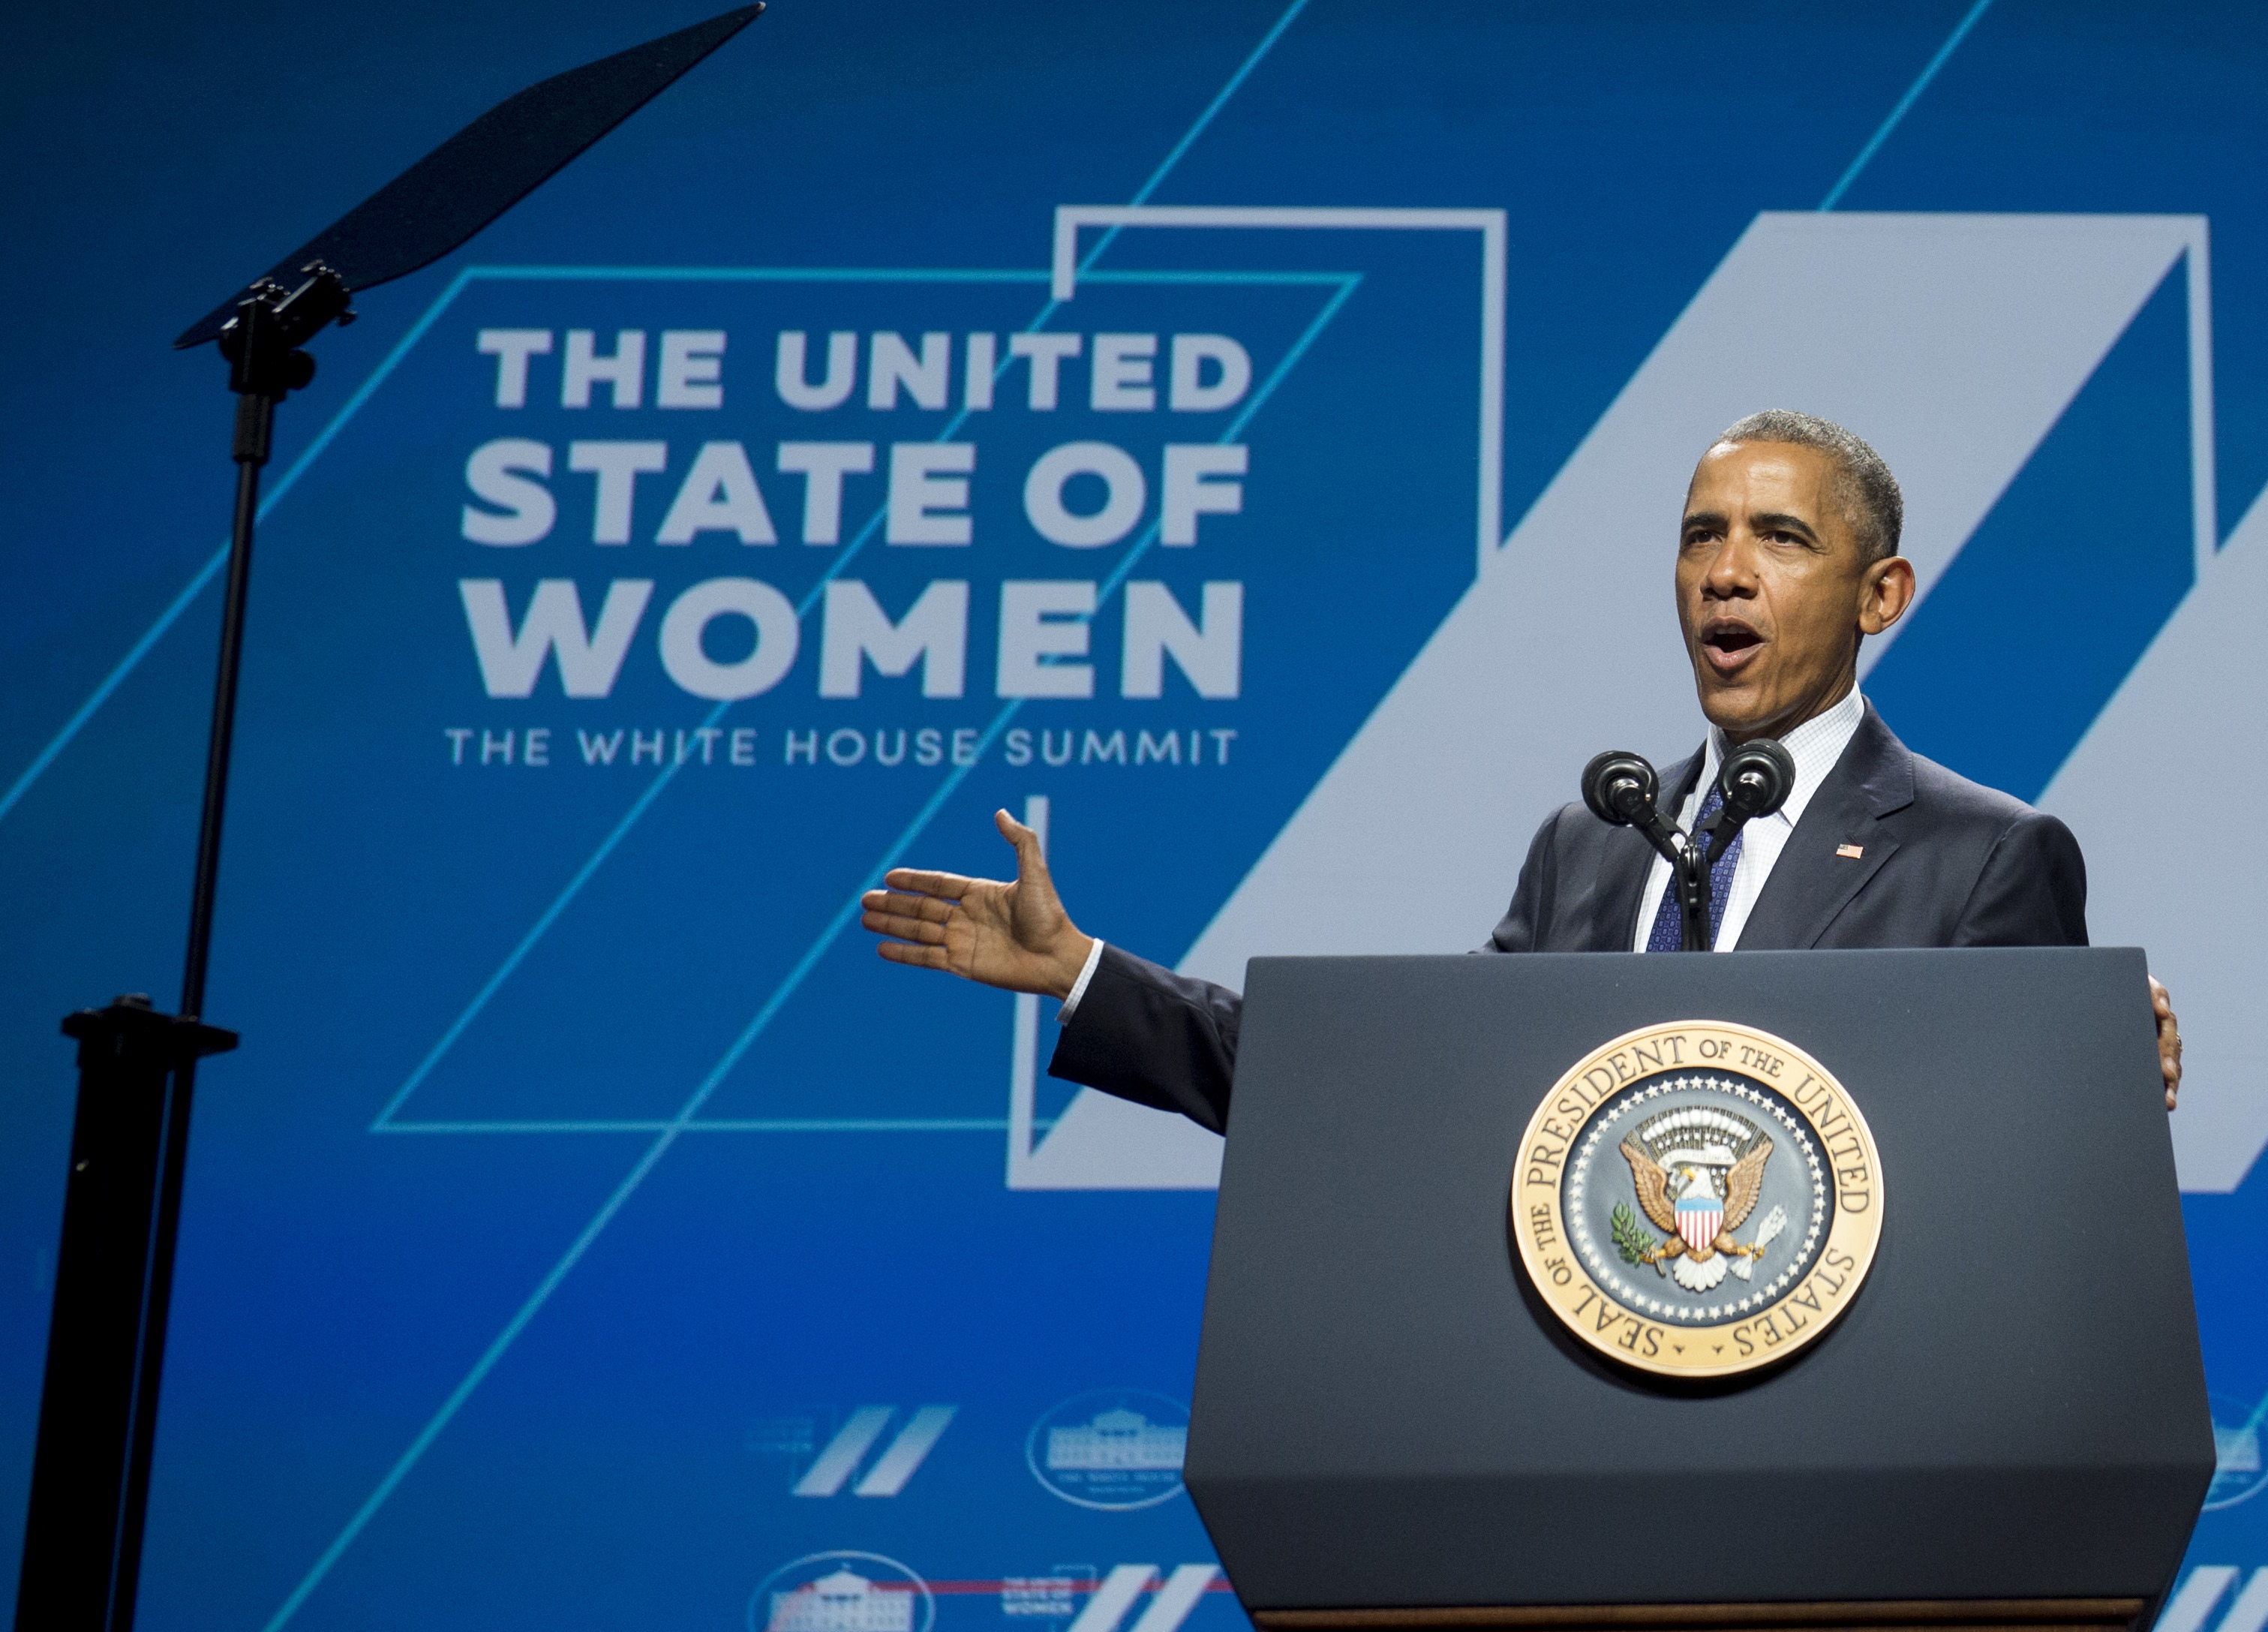 US President Barack Obama speaks during the United State of Women Summit at the Washington Convention Center in Washington, DC, June 14, 2016. / AFP PHOTO / SAUL LOEB